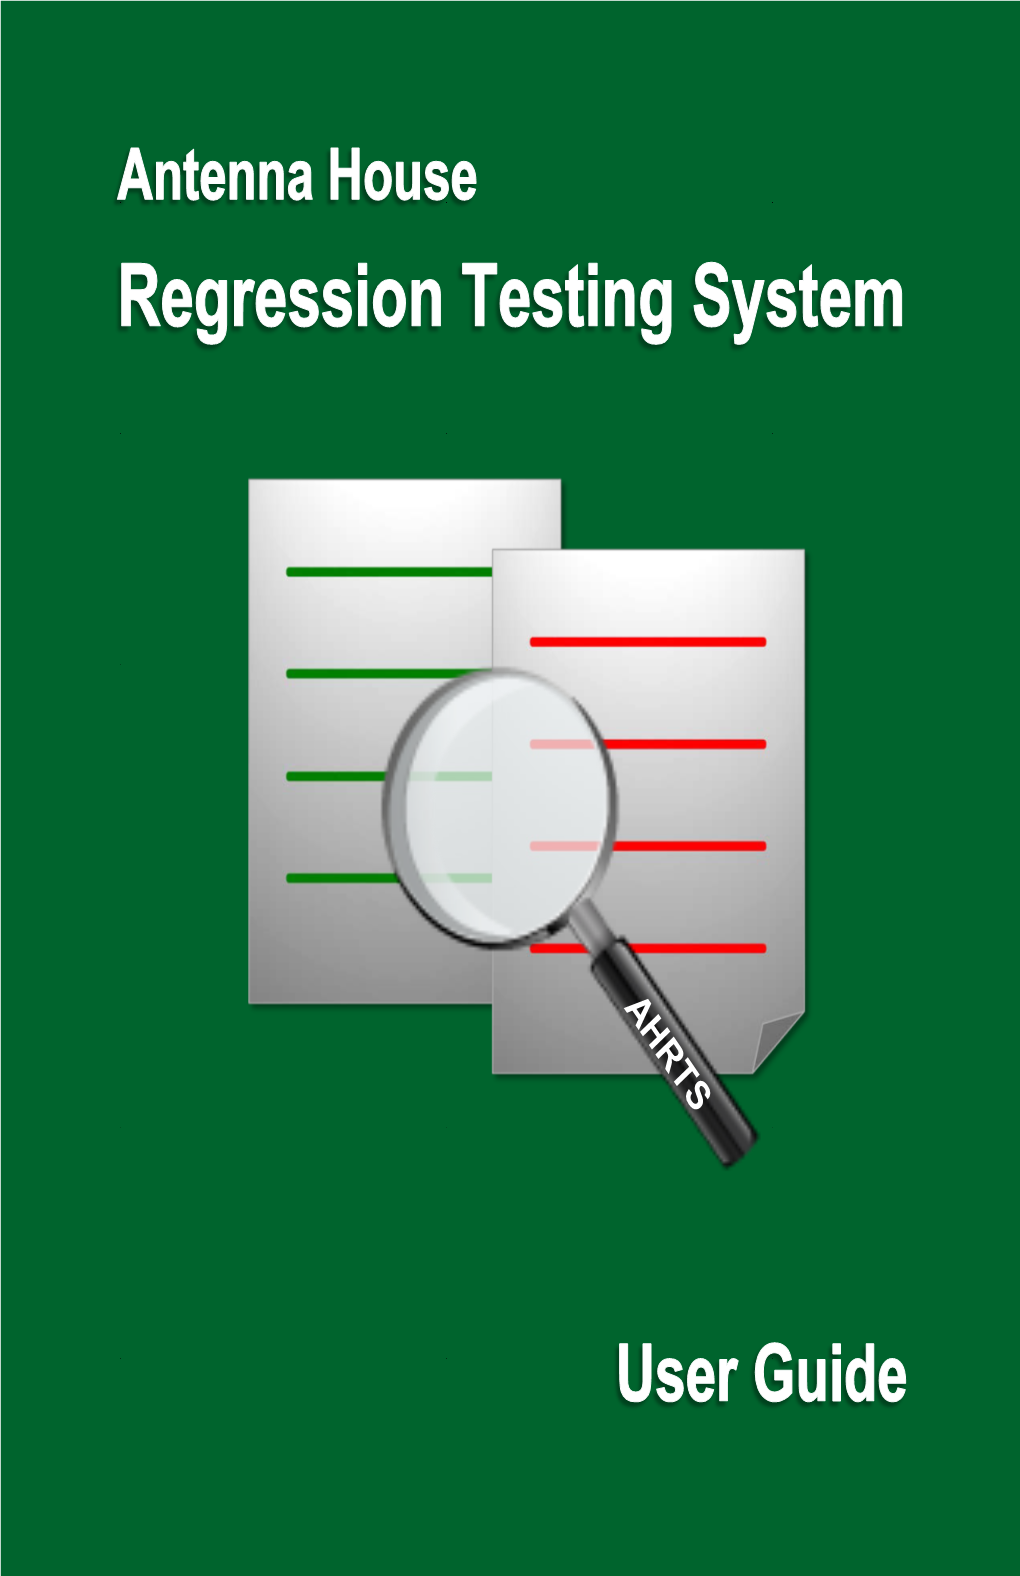 Antenna House Regression Testing System User Guide V1.5